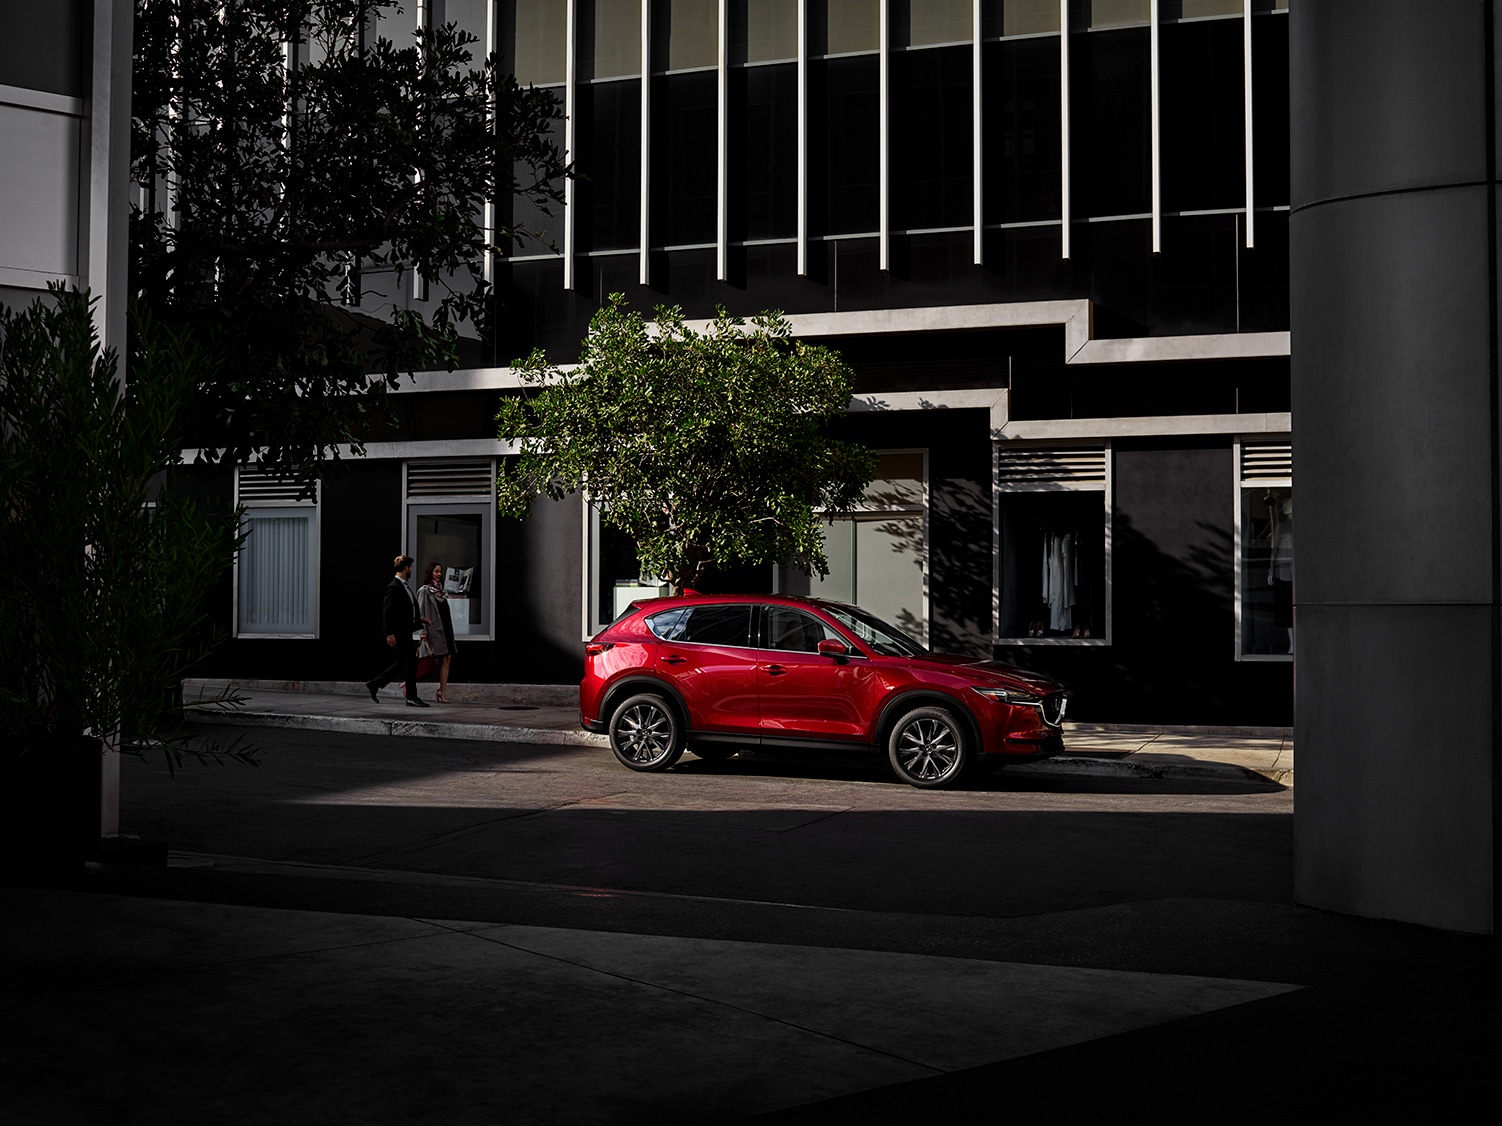 Jack Giambalvo Mazda is a Car Dealership in Valley View, PA | 2021 Mazda CX-5 parked out front of building